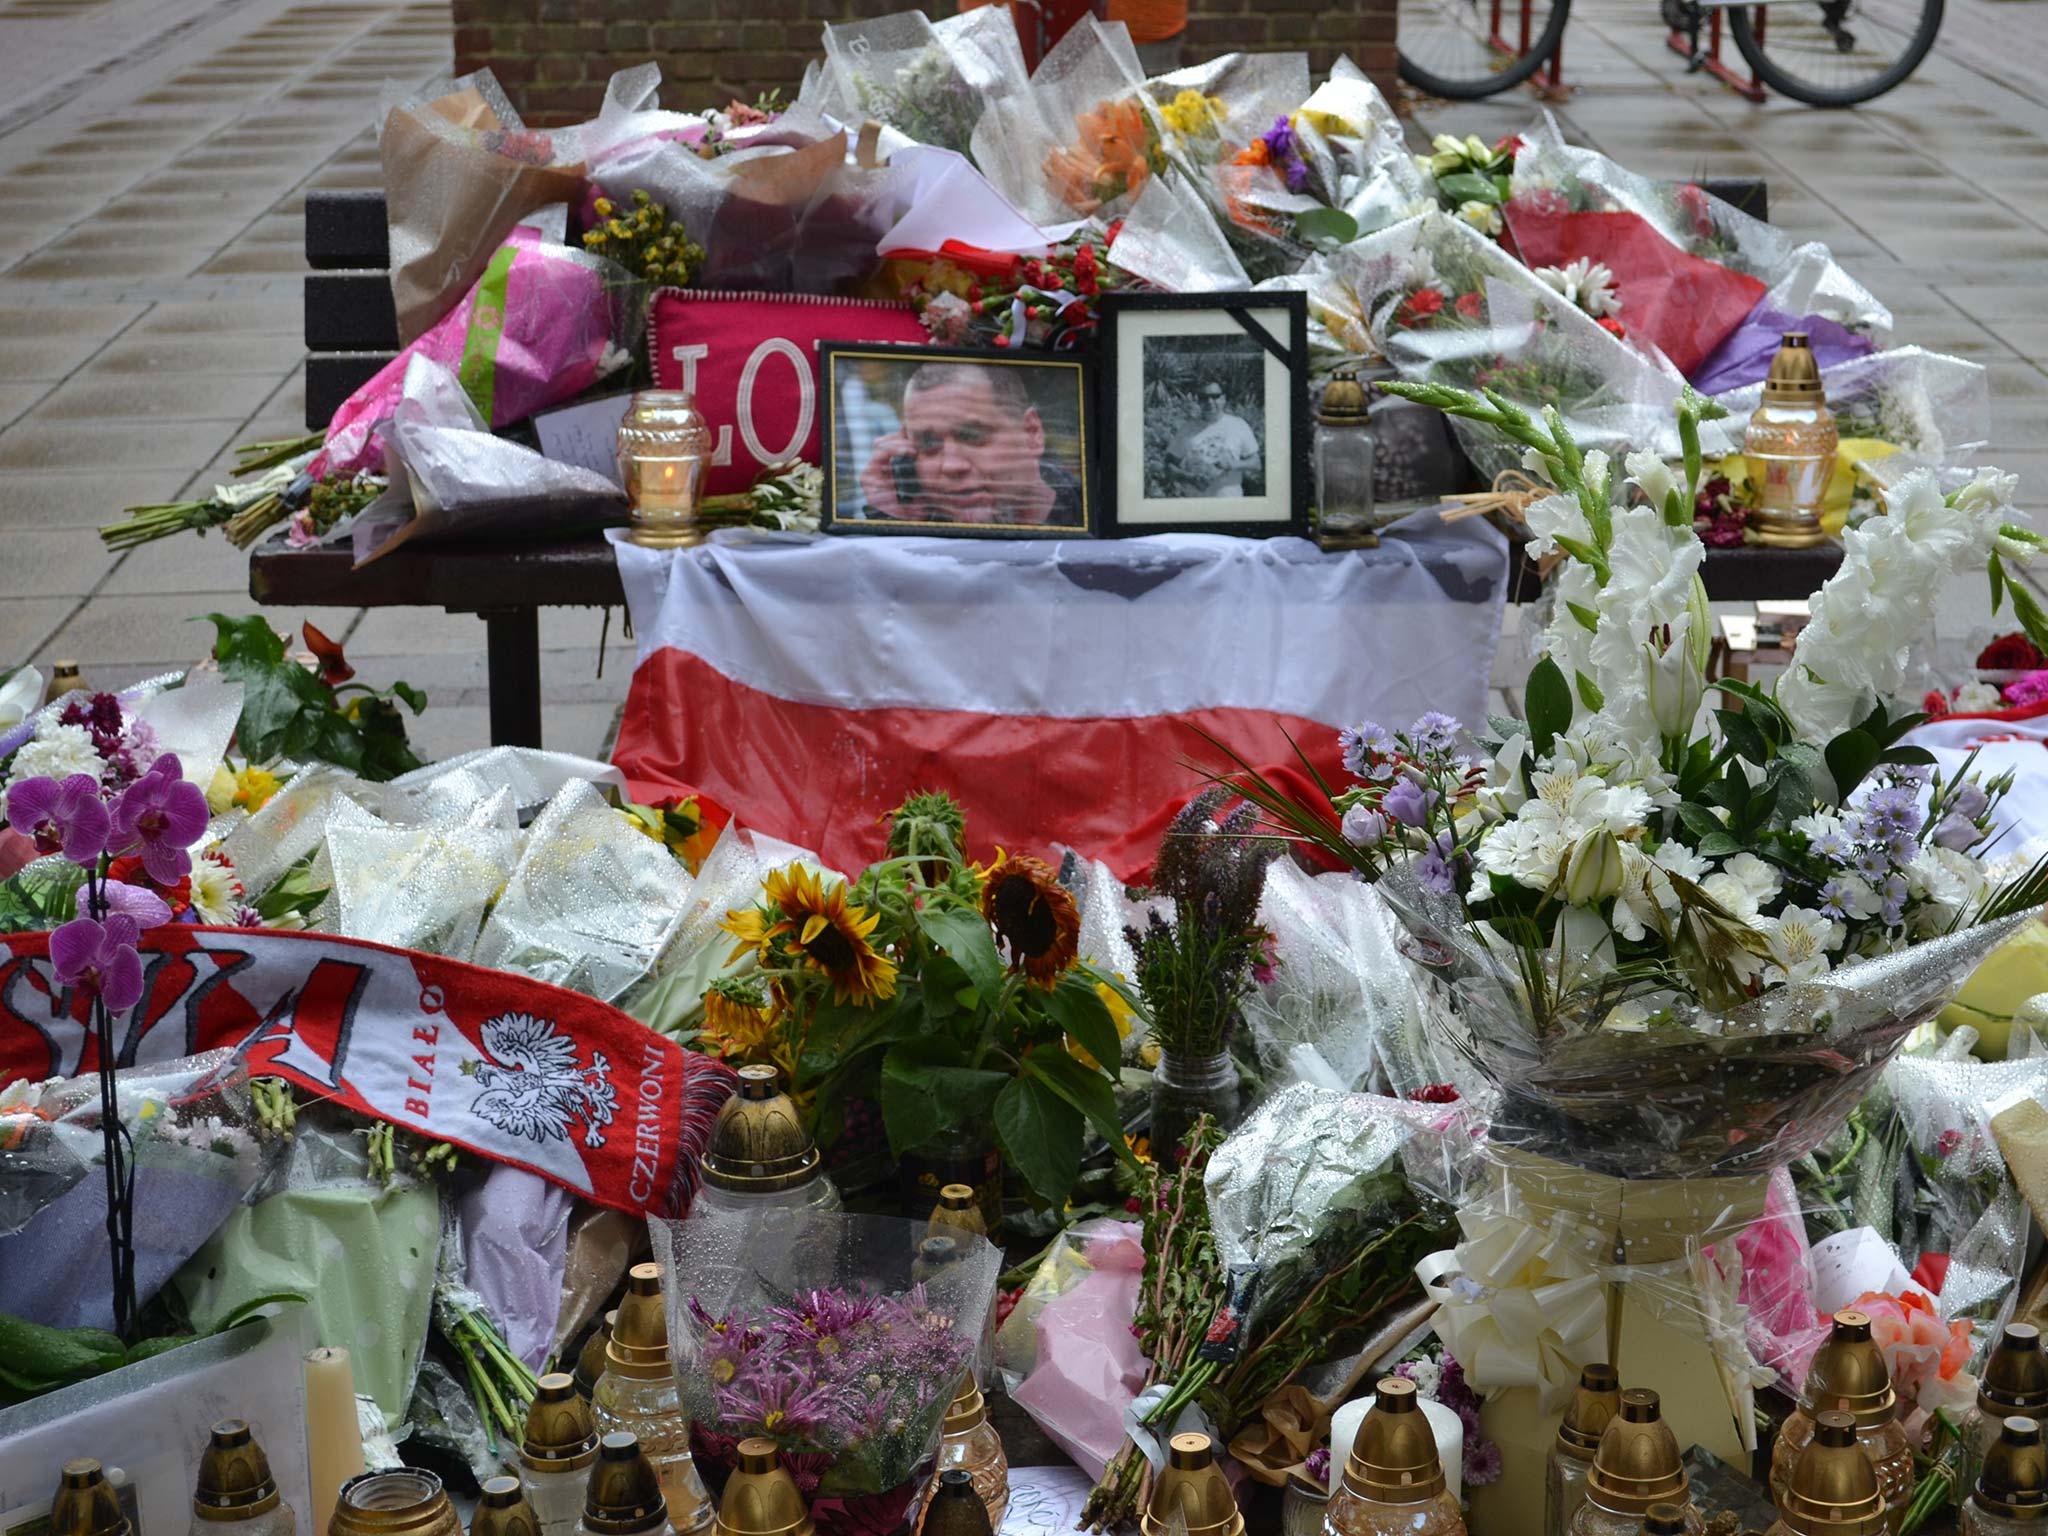 Tributes left in Harlow to a Polish man killed in a suspected hate crime